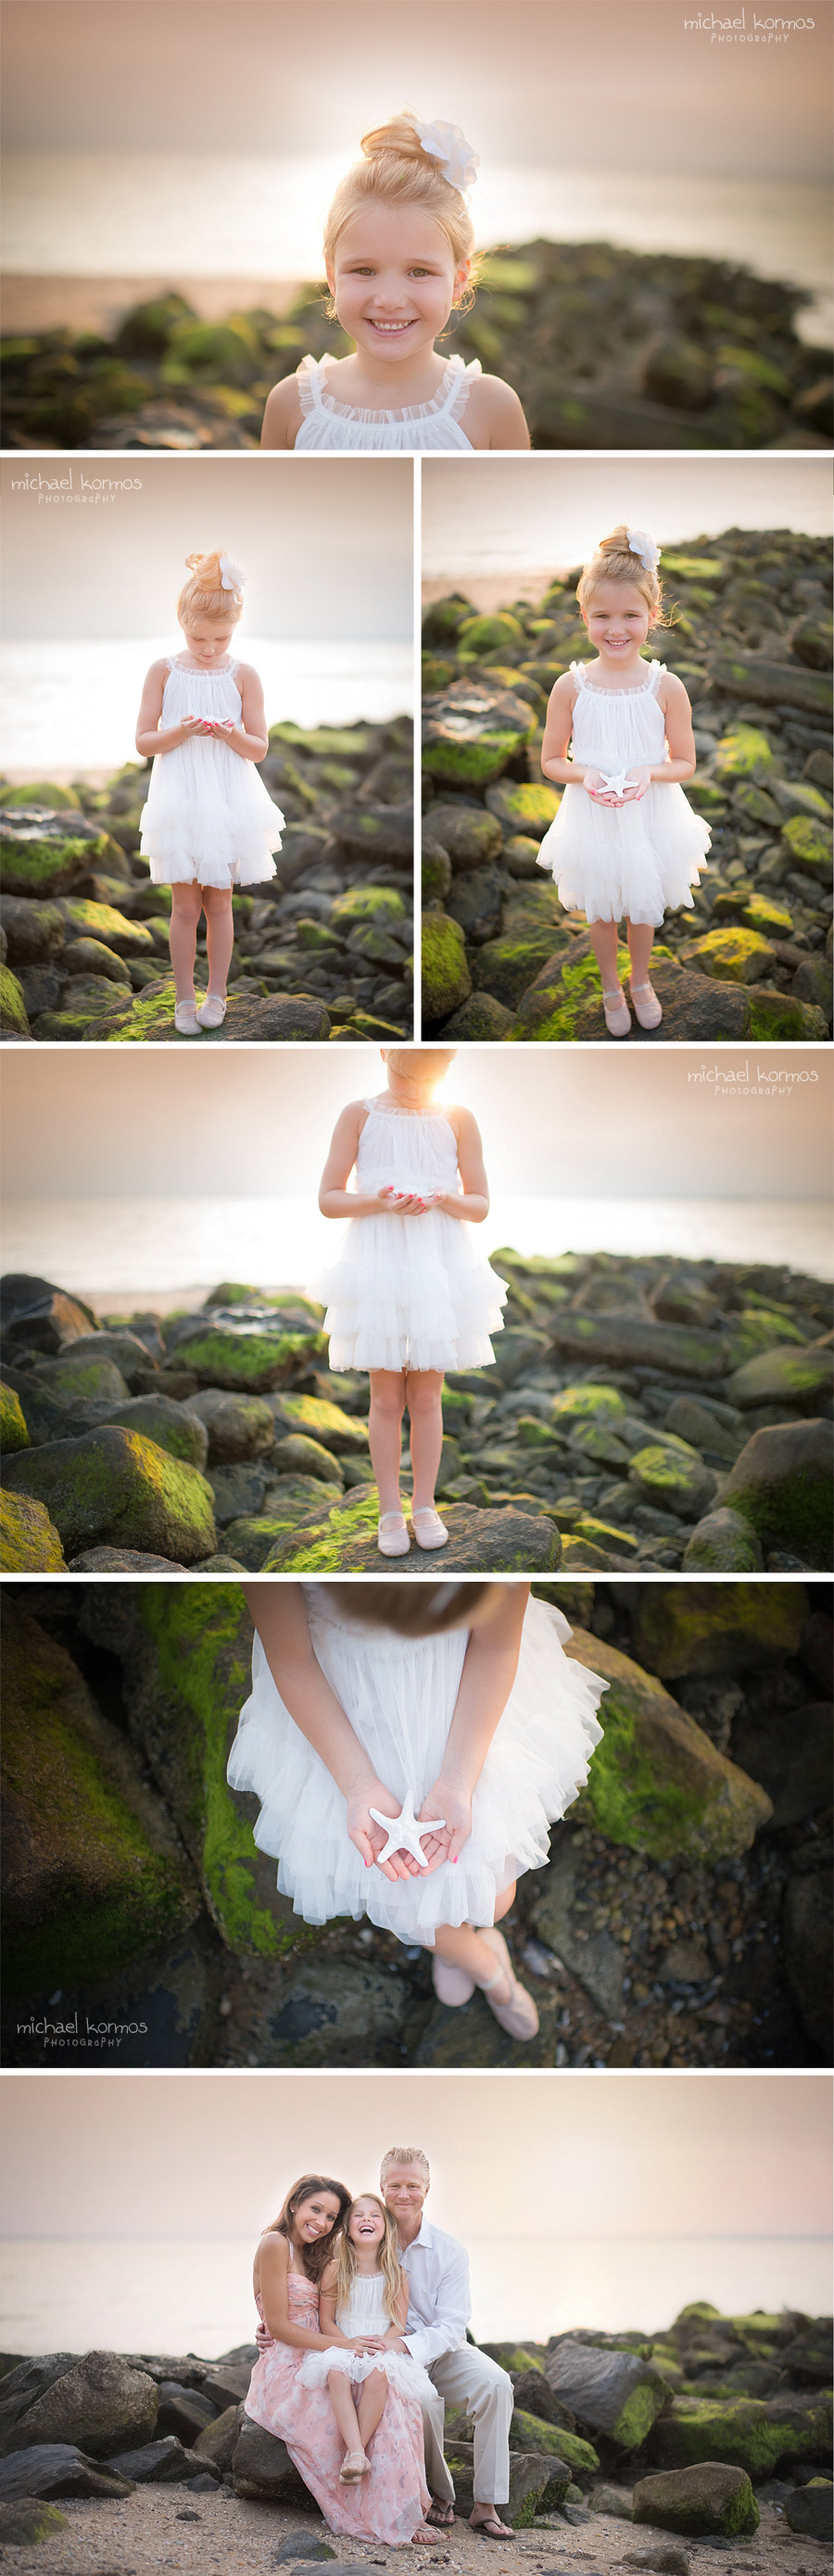 westchester beach family photography